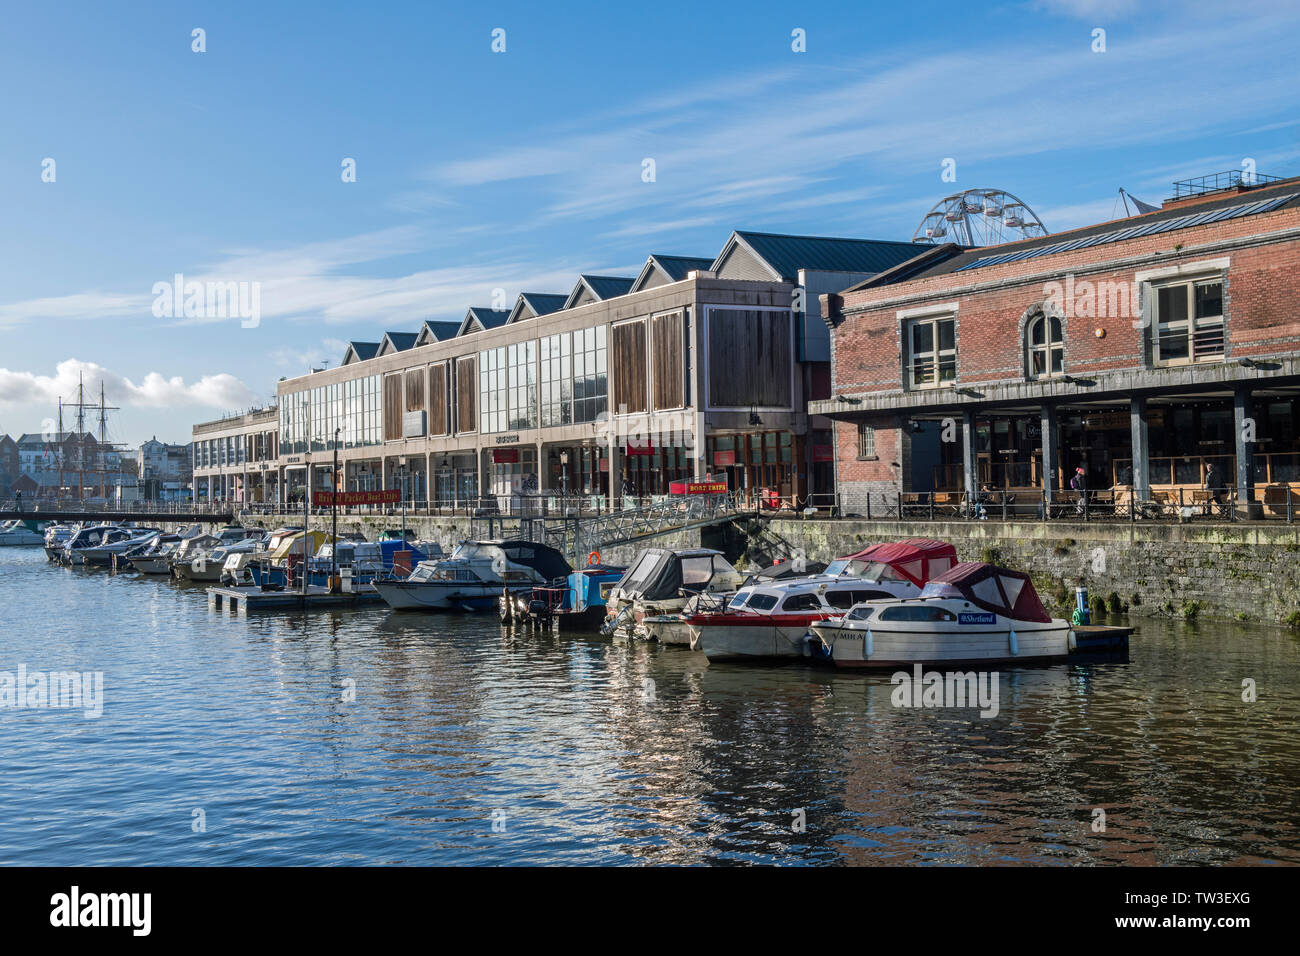 The Floating Harbour at Bristol on a sunny blue sky winter day showing moored boats and people in this bustling west country city. Stock Photo